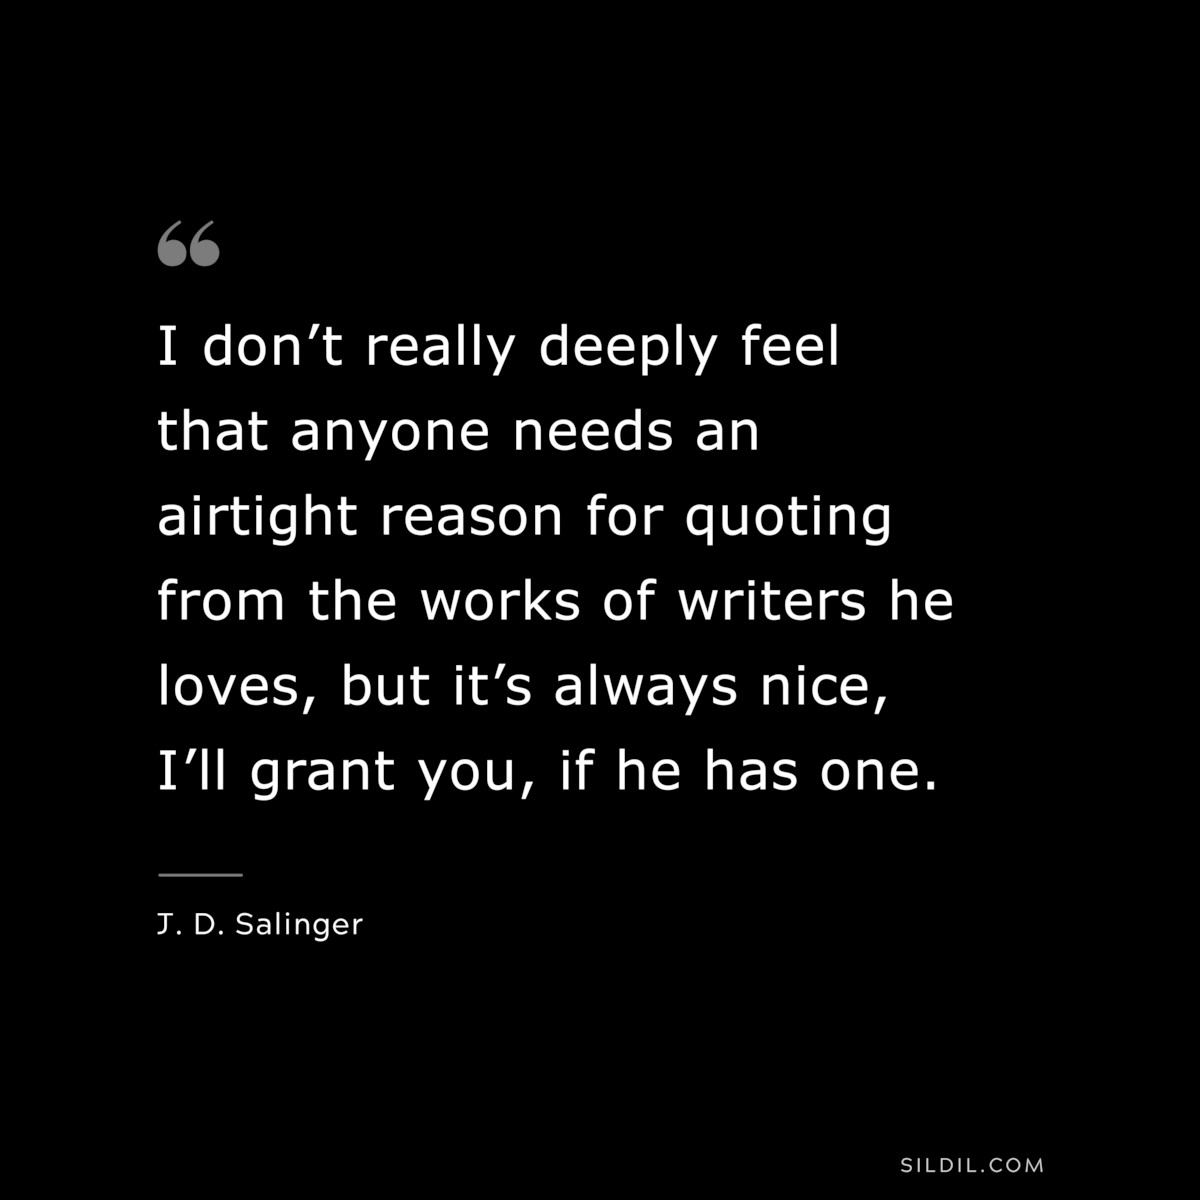 I don’t really deeply feel that anyone needs an airtight reason for quoting from the works of writers he loves, but it’s always nice, I’ll grant you, if he has one. — J. D. Salinger